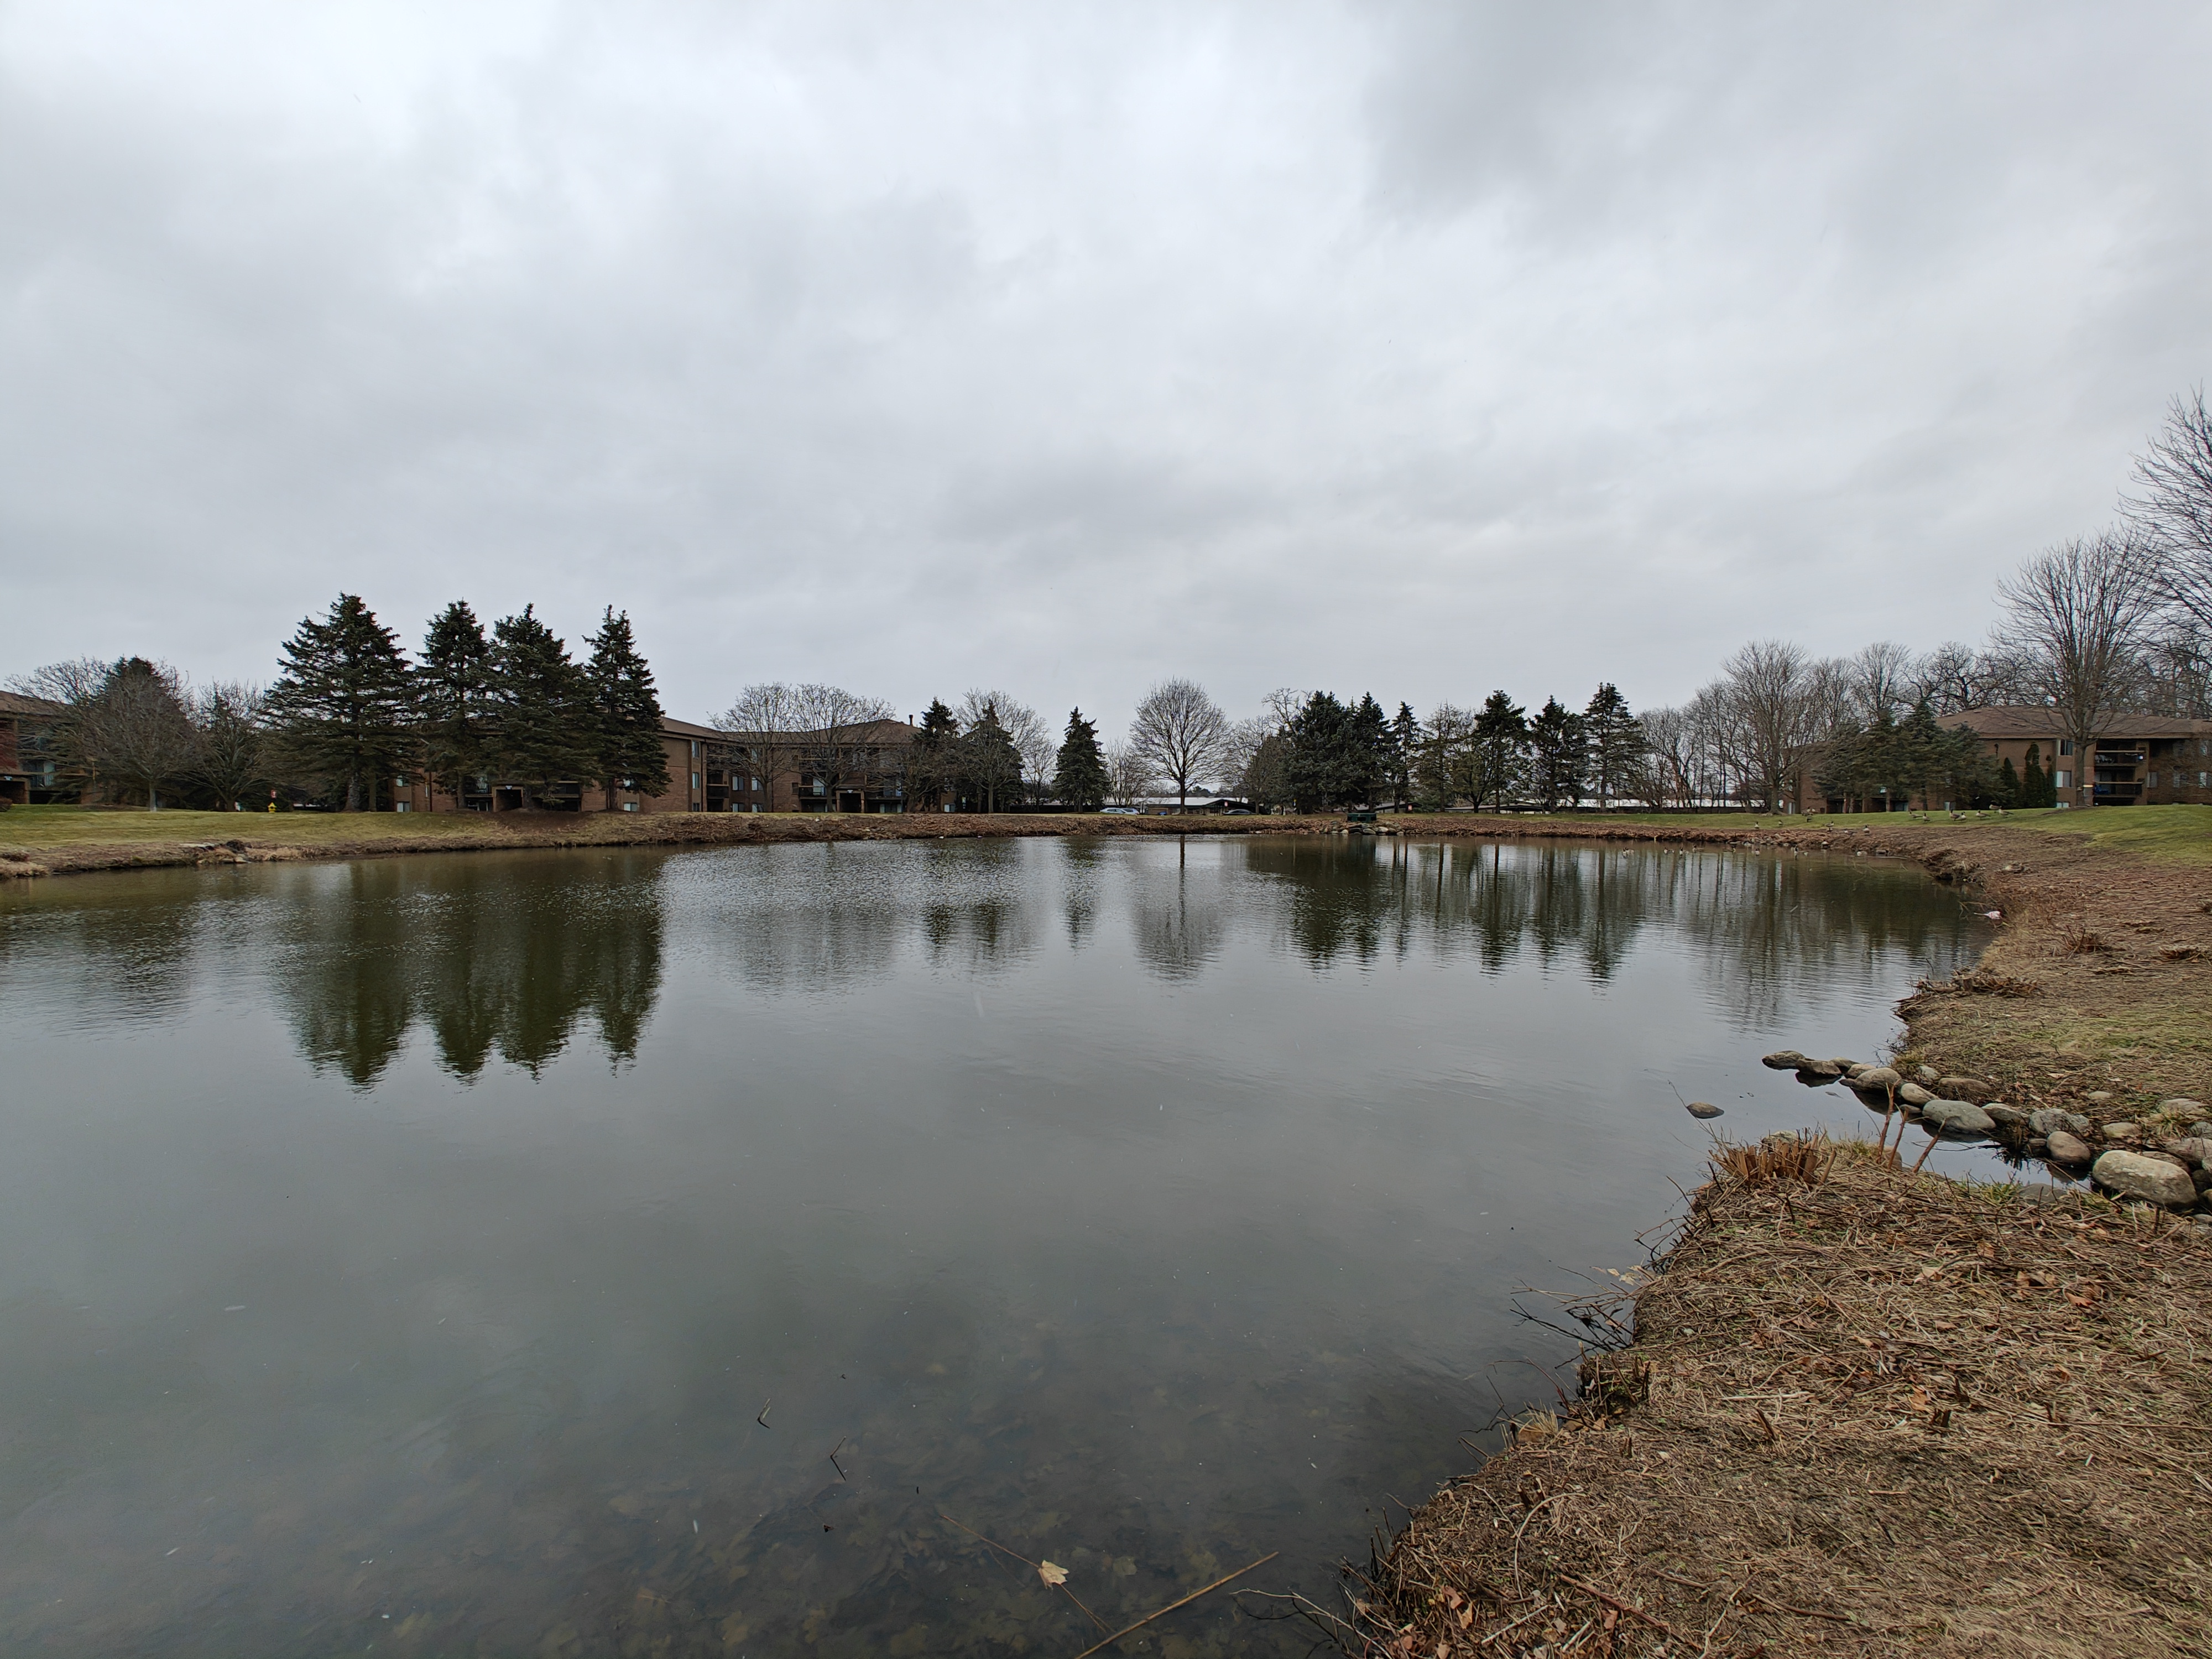 Photo of a pond with an overcast sky in the background.